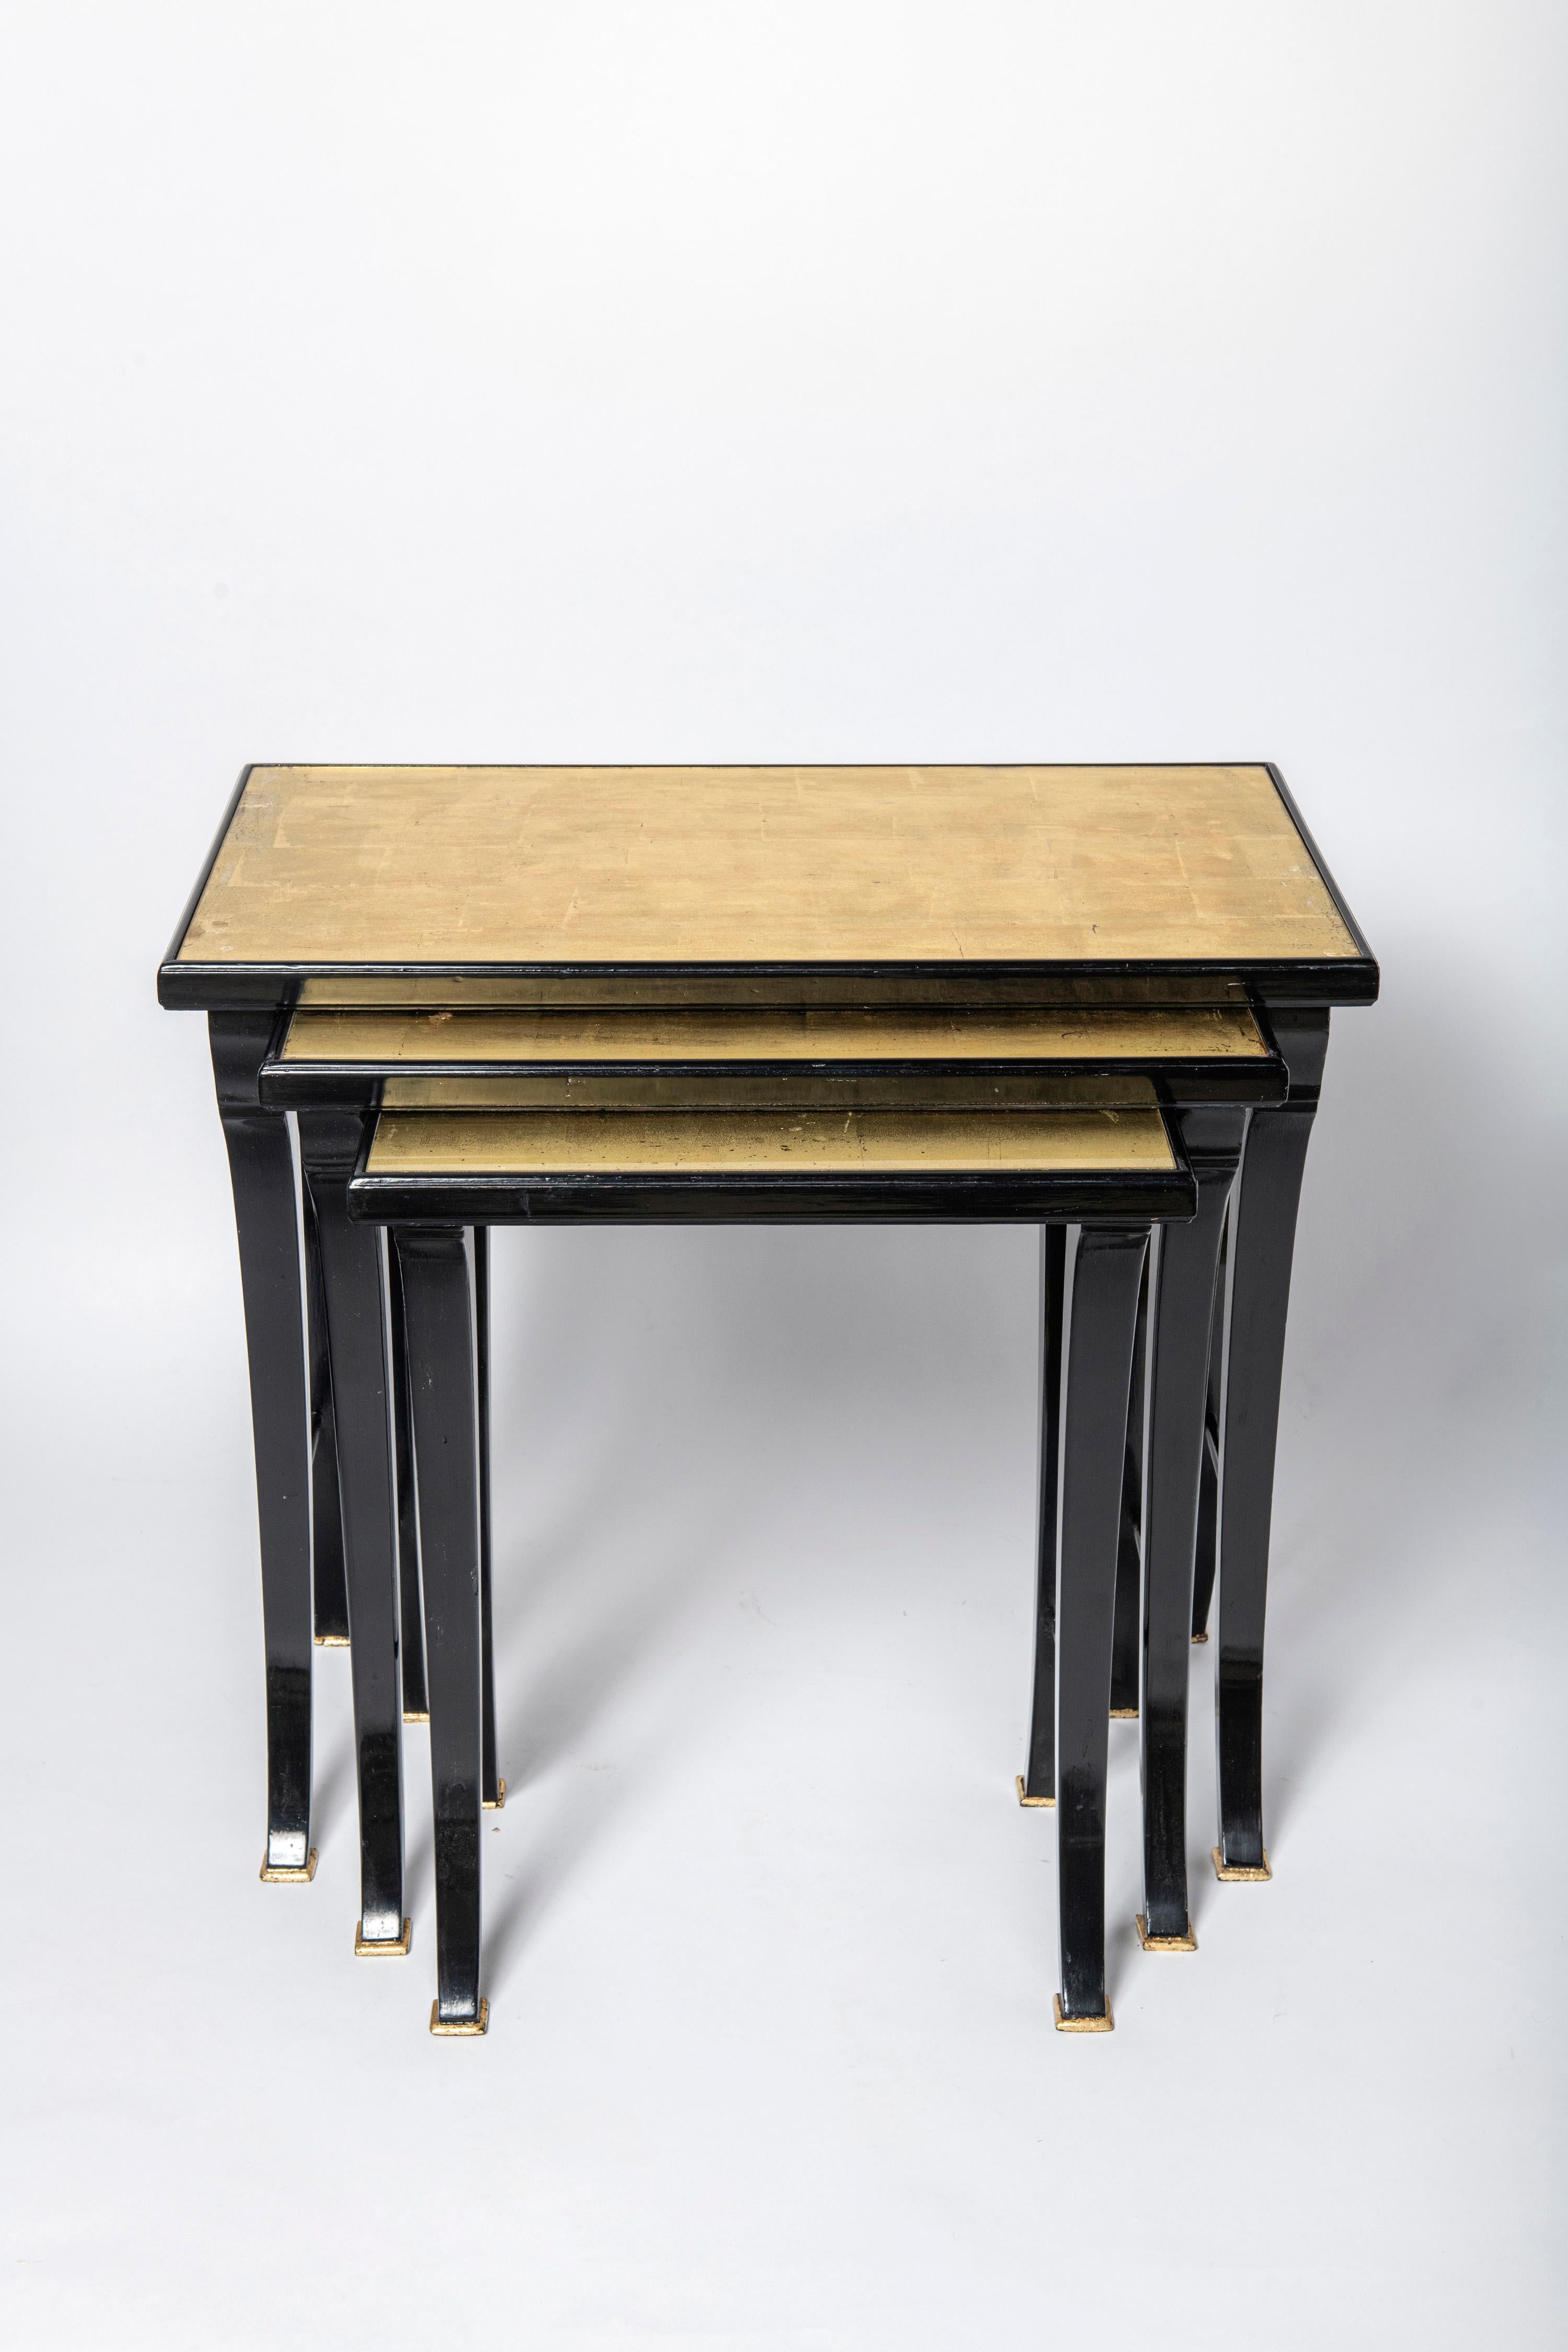 Pair of wood, glass and gold leaf nest tables by Maison Jansen. France, circa 1950.

Dimensions big table: 56 cm height, 61 cm width, 37 cm depth.
Dimensions middle table: 53 cm height, 50 cm width, 36 cm depth.
Dimensions small table: 50 cm height,